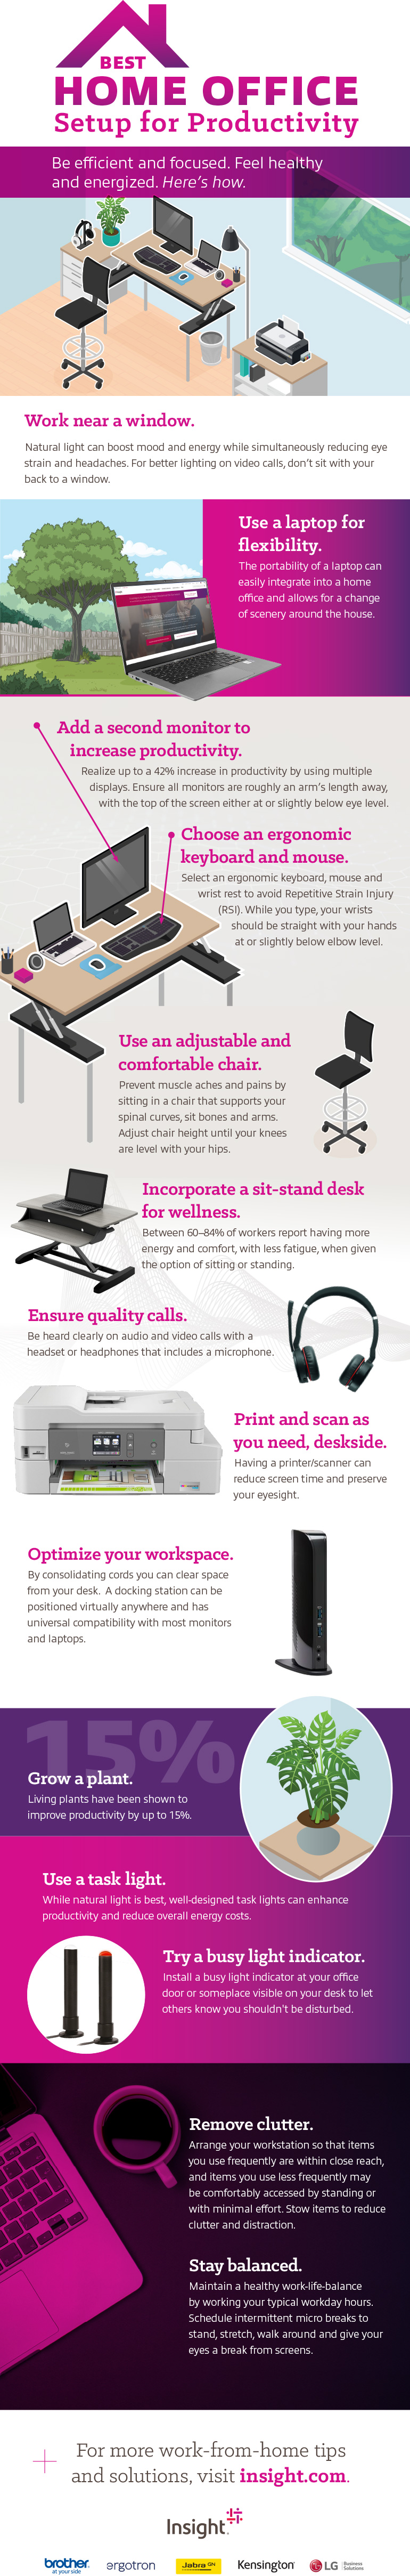 Infographic displaying the Guide: Best Home Office Setup for Productivity Translated below.